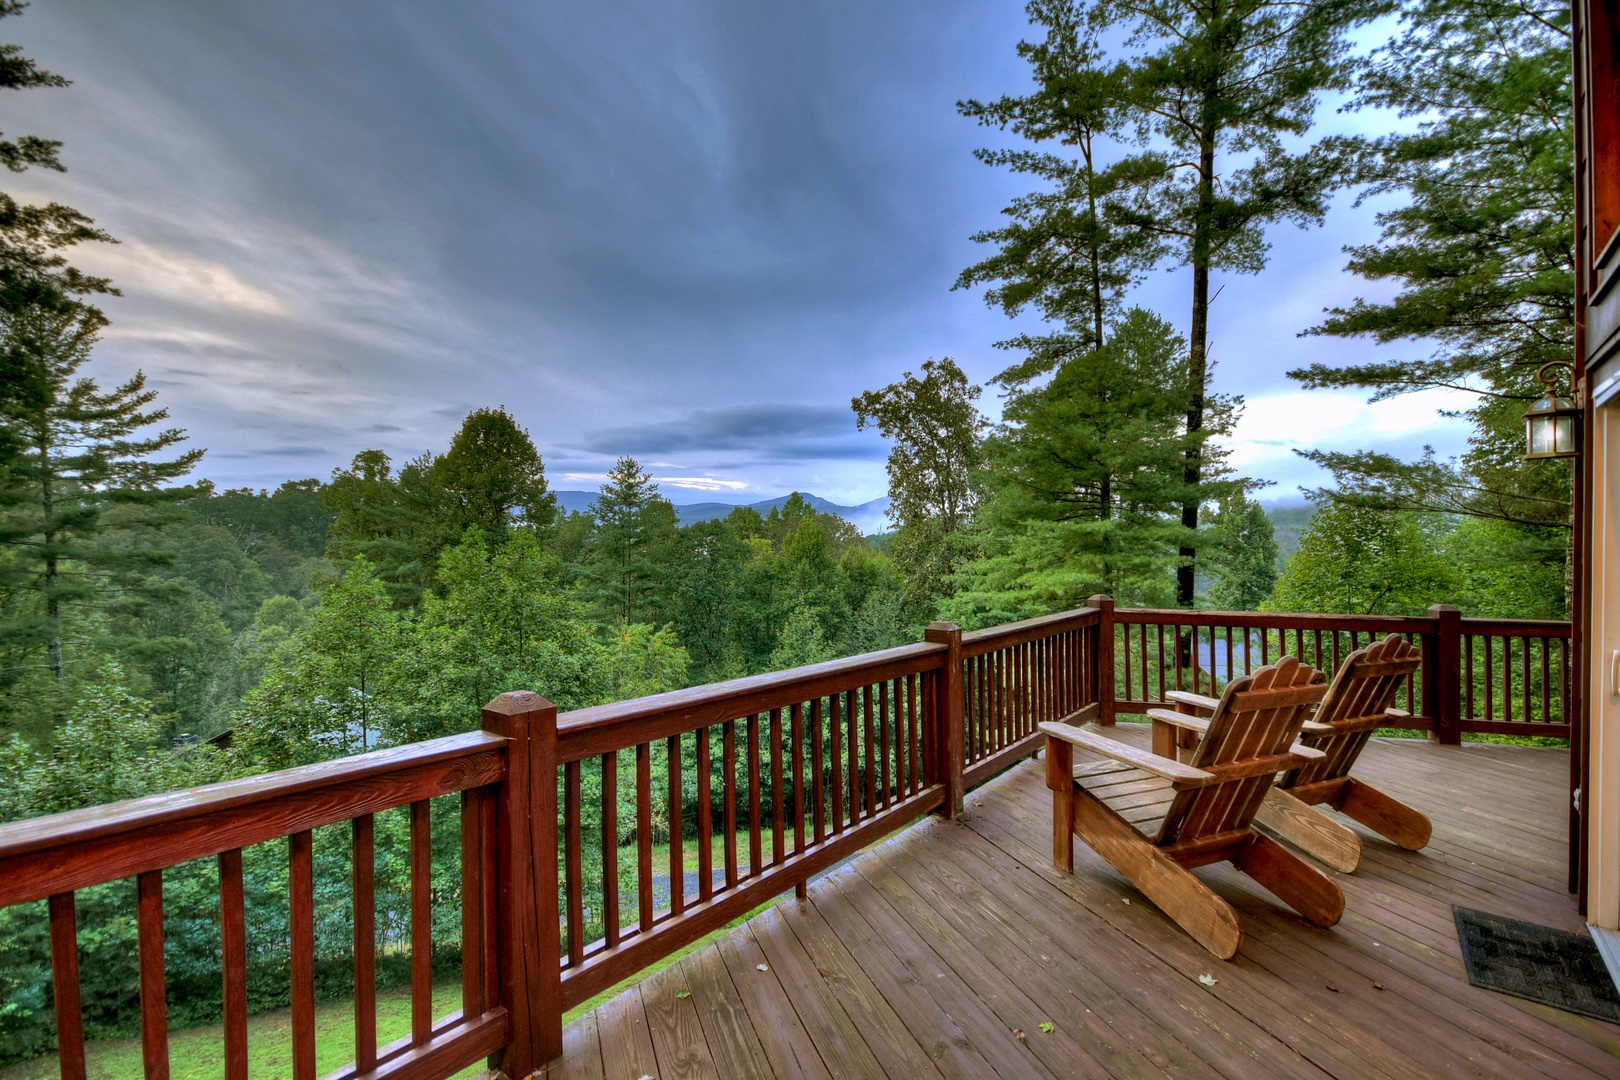 Mountain High Lodge - Entry Level Deck with Forest and Mountain Views at Dusk